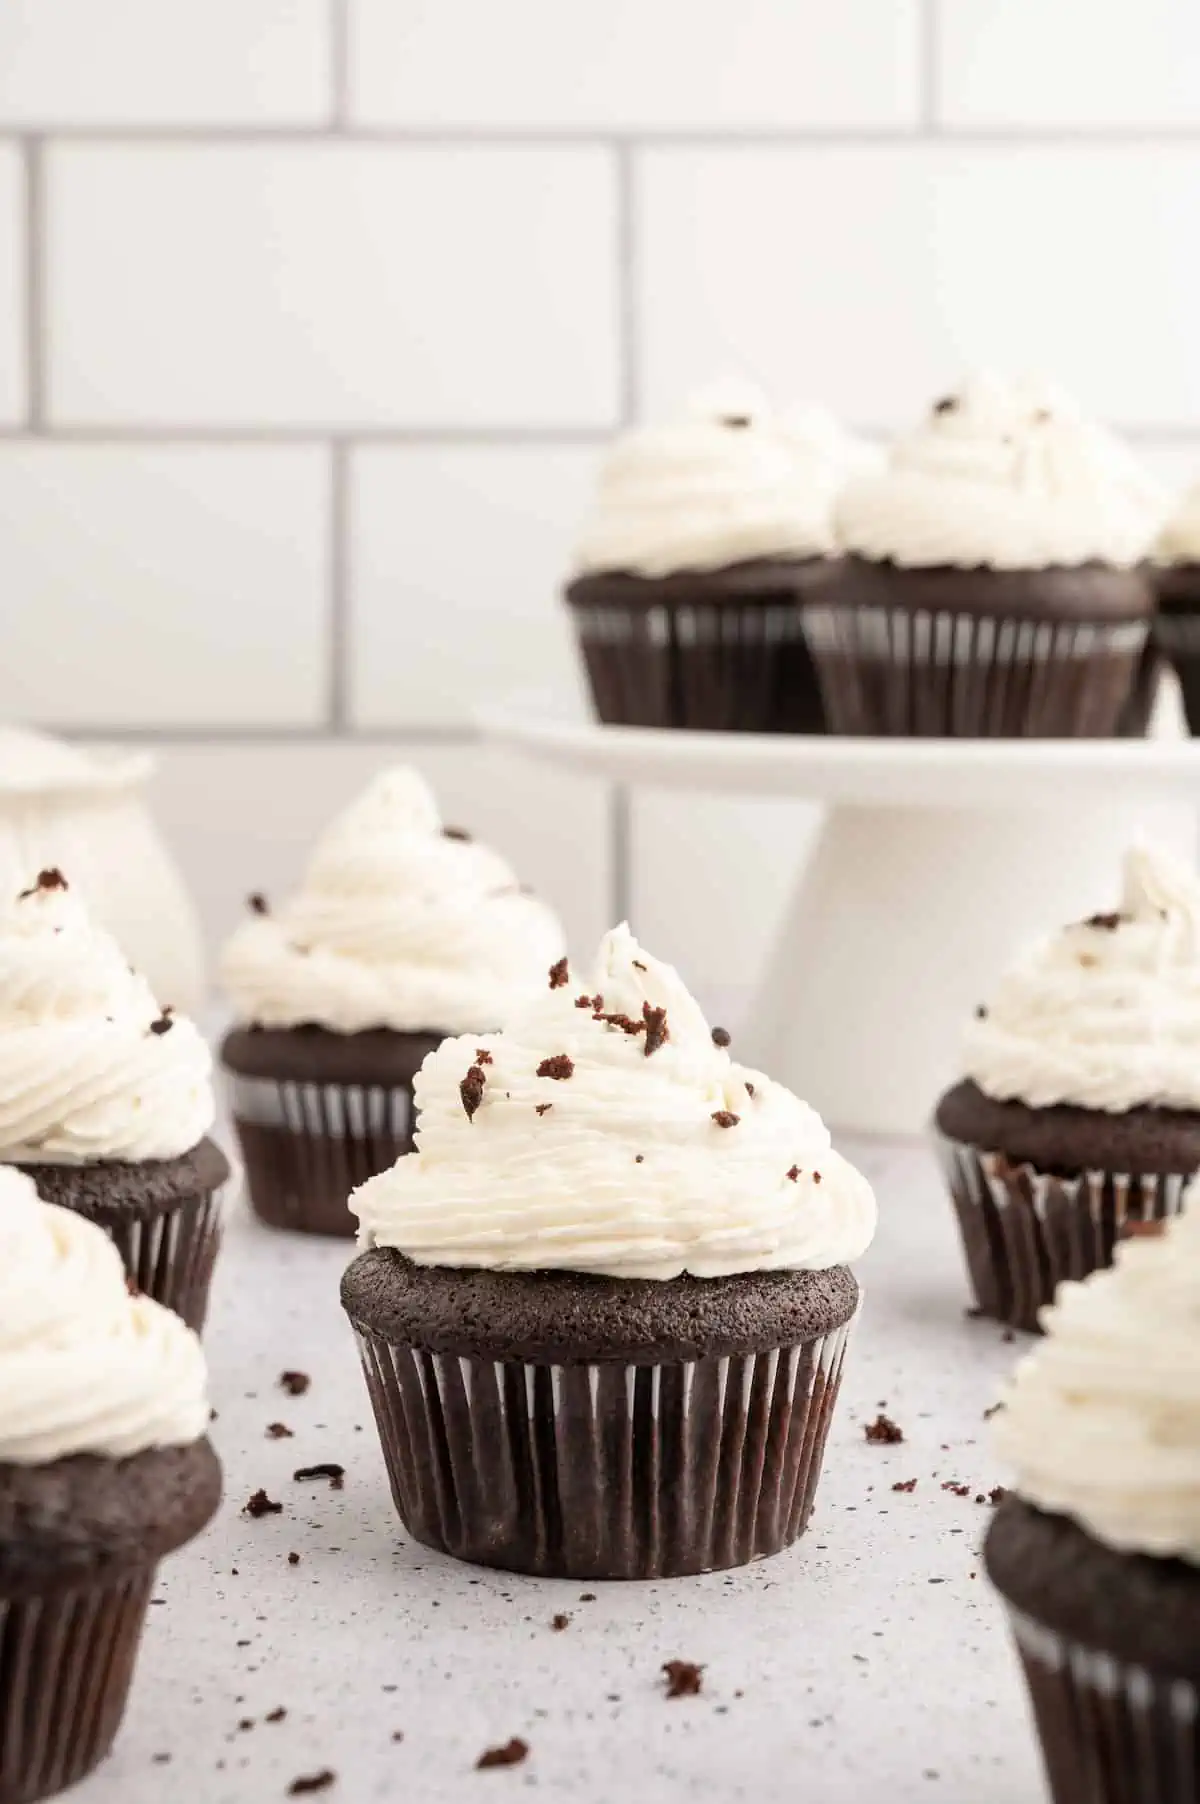 Vegan chocolate cupcakes topped with vegan buttercream frosting and chocolate shavings.